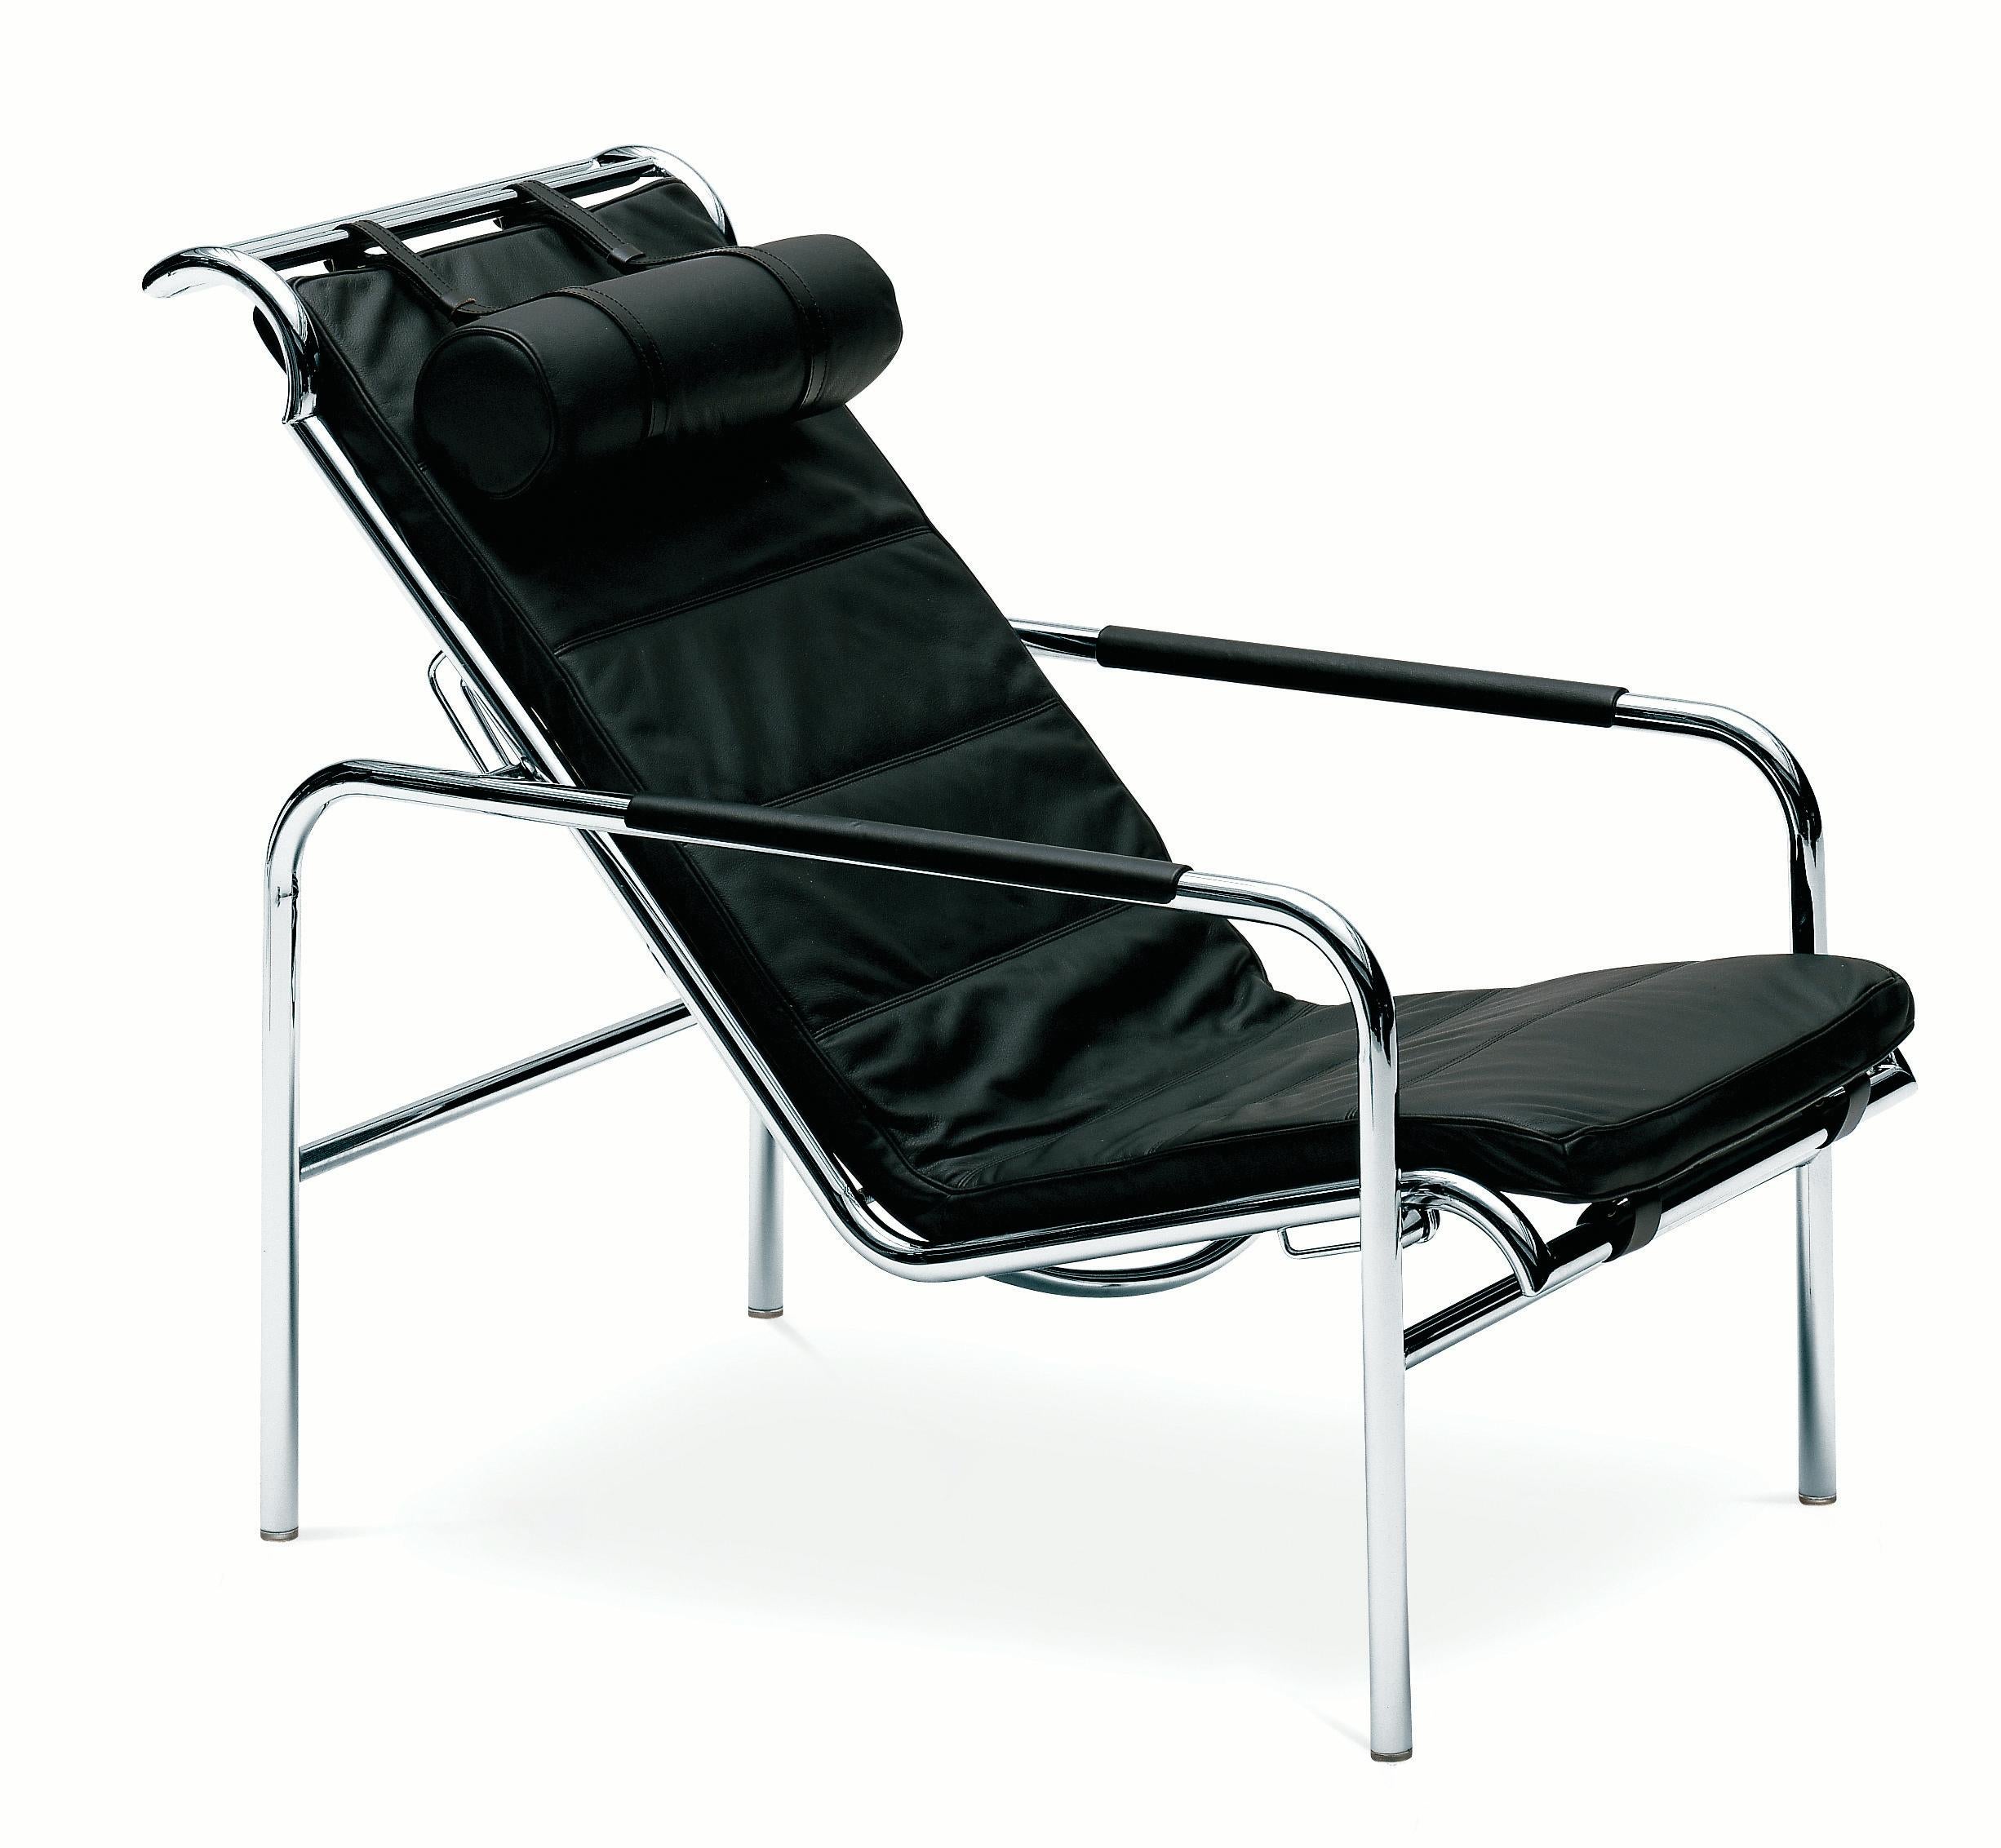 Zanotta Genni Lounge Chair in Black Leather with Chromium Plated Steel Frame by Gabriele Mucchi

Chromium-plated steel frame or with natural or black nickel-satin finish, or black painted. Suspension on steel springs. Adjustable seat in two